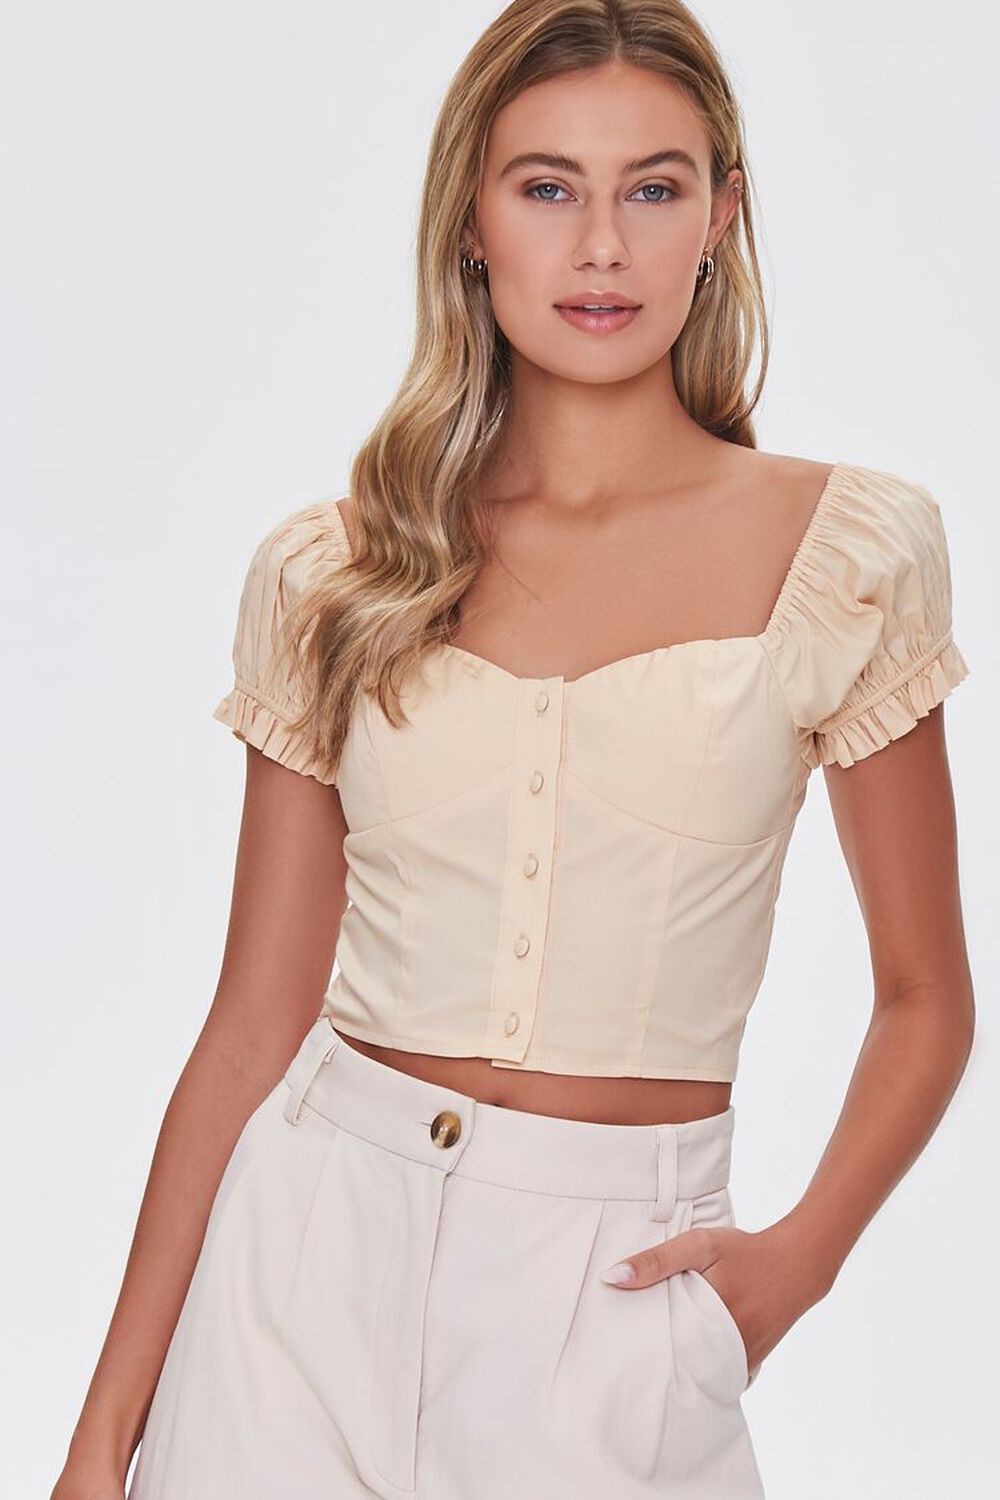 CHAMPAGNE Button-Front Crop Top, image 1